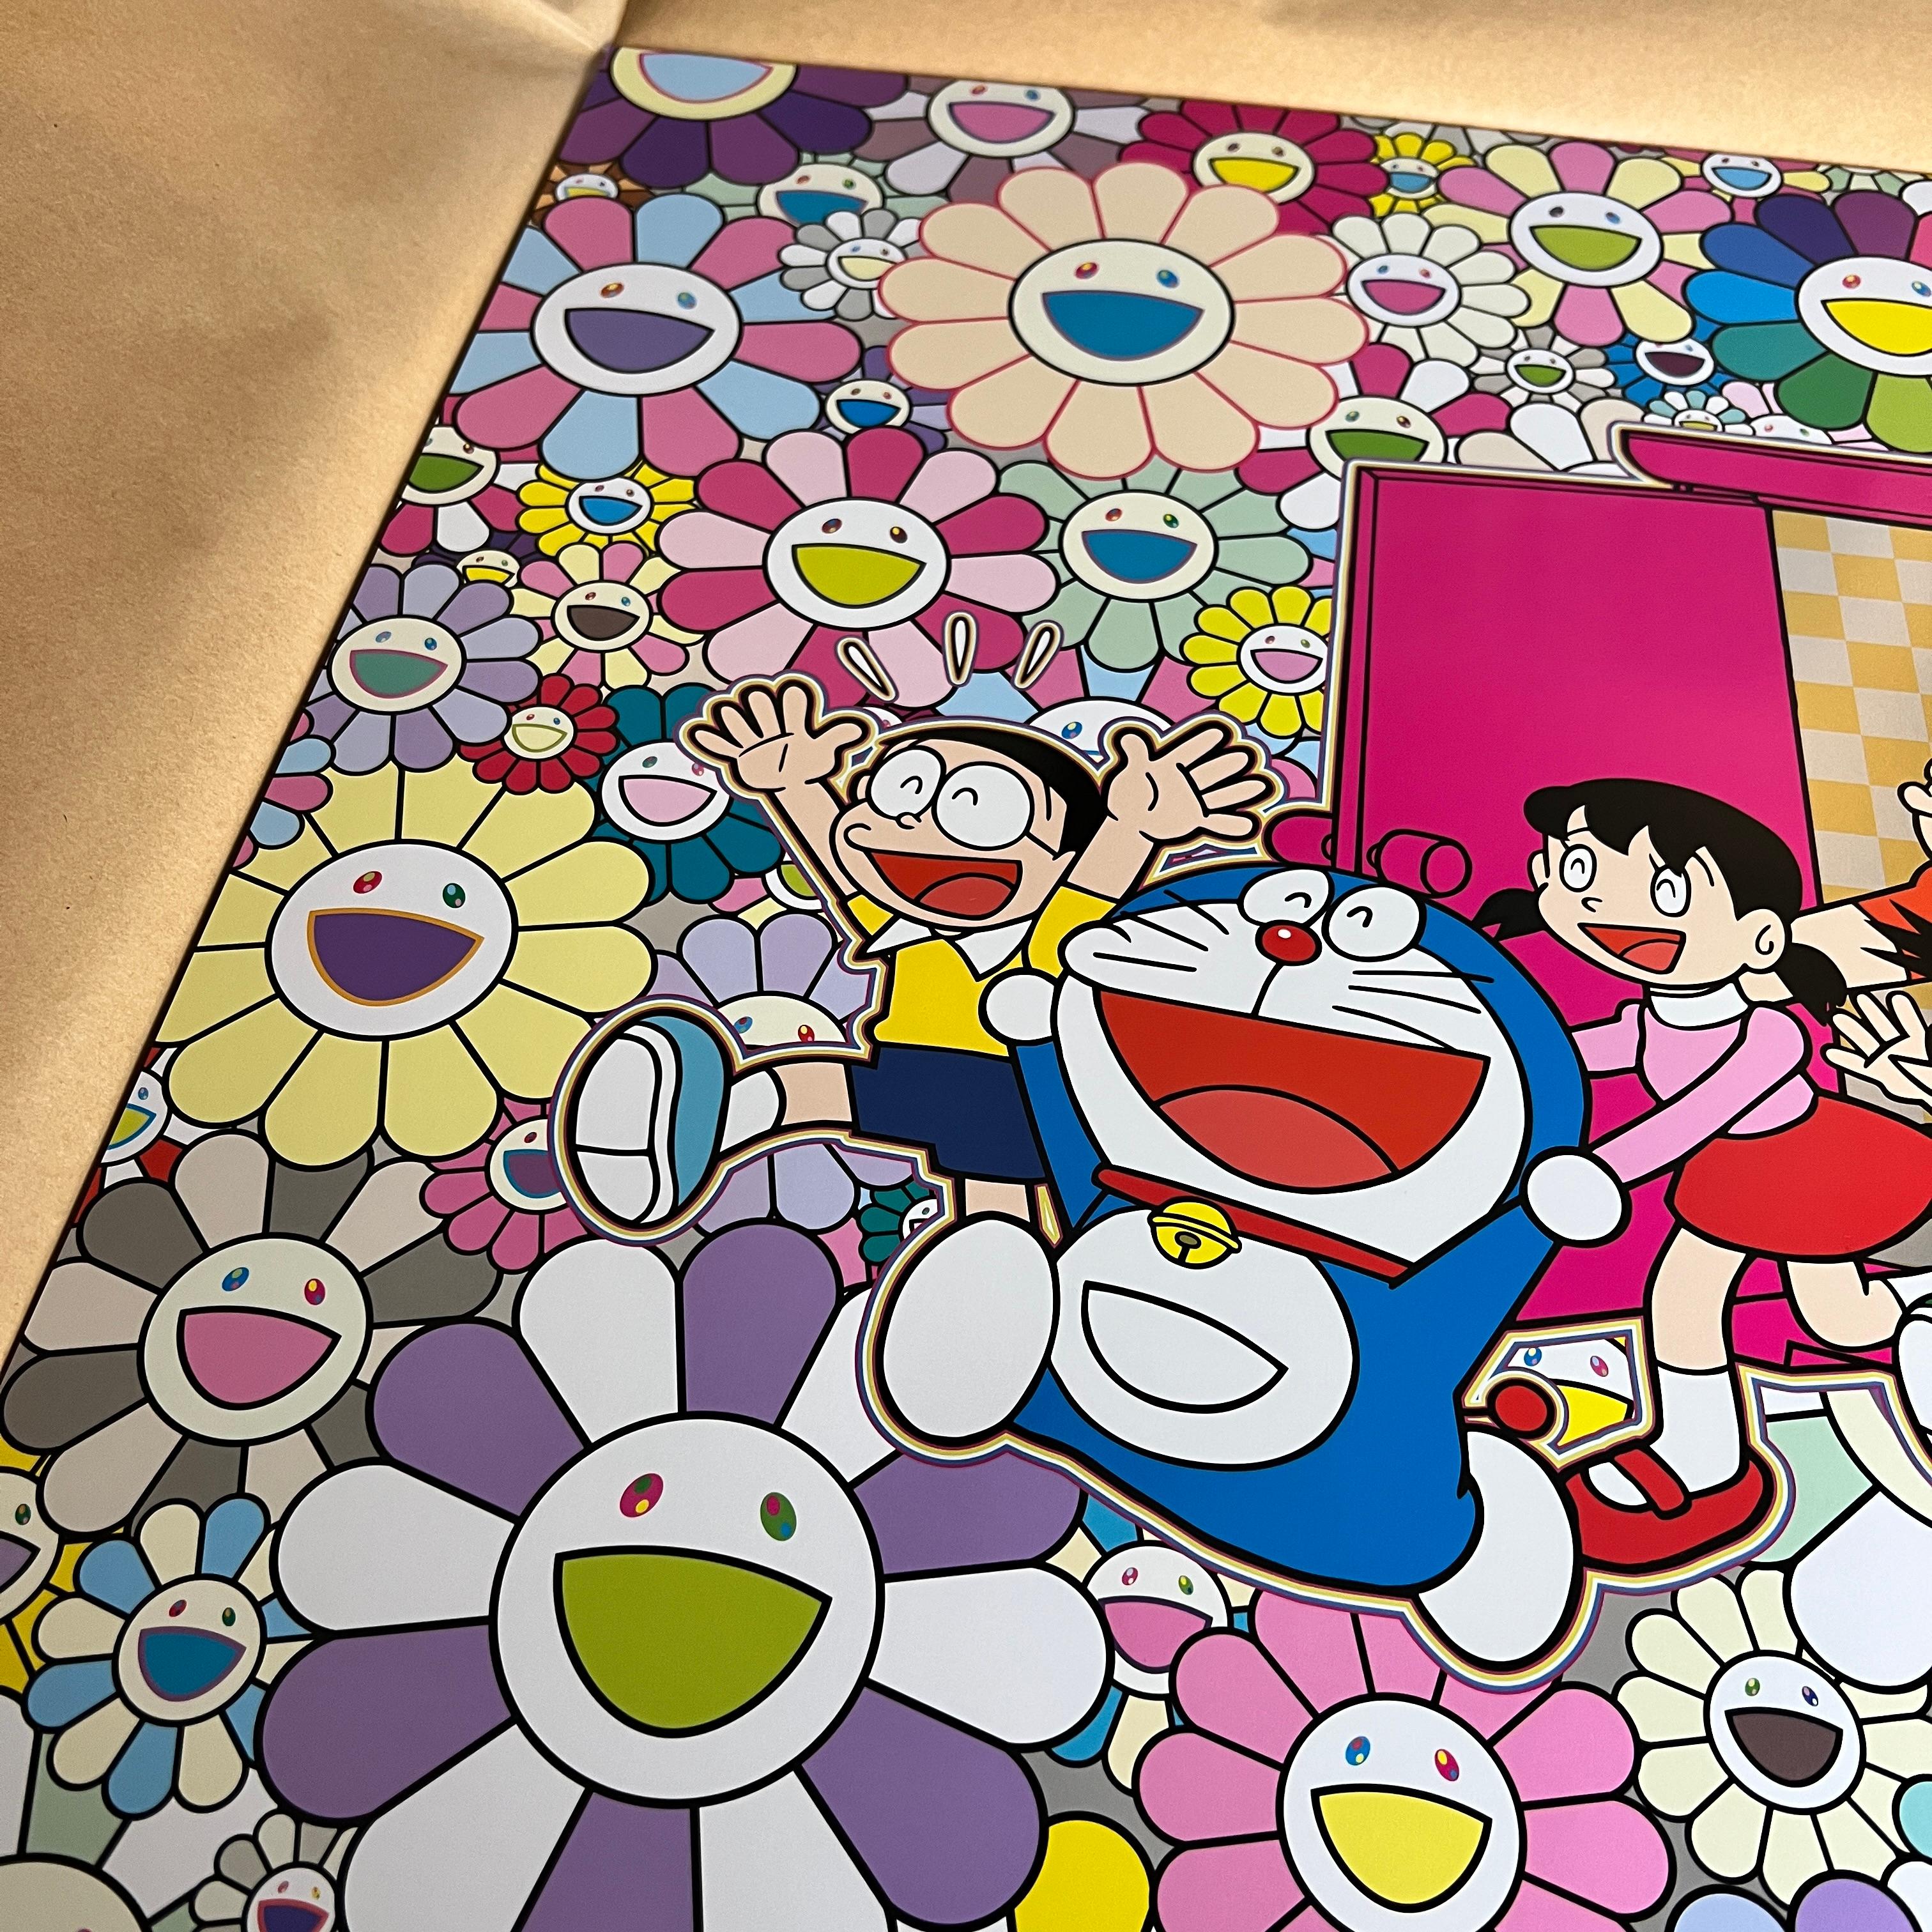 Artist: Takashi Murakami
Title: Saved by Dokodemo Door (Anywhere Door)
Year: 2021
Edition: 300
Size: 600 × 600 mm
Medium: Offset print, cold stamp and high gloss varnishing

This is hand signed by Takashi Murakami.

Note: This will be shipped from